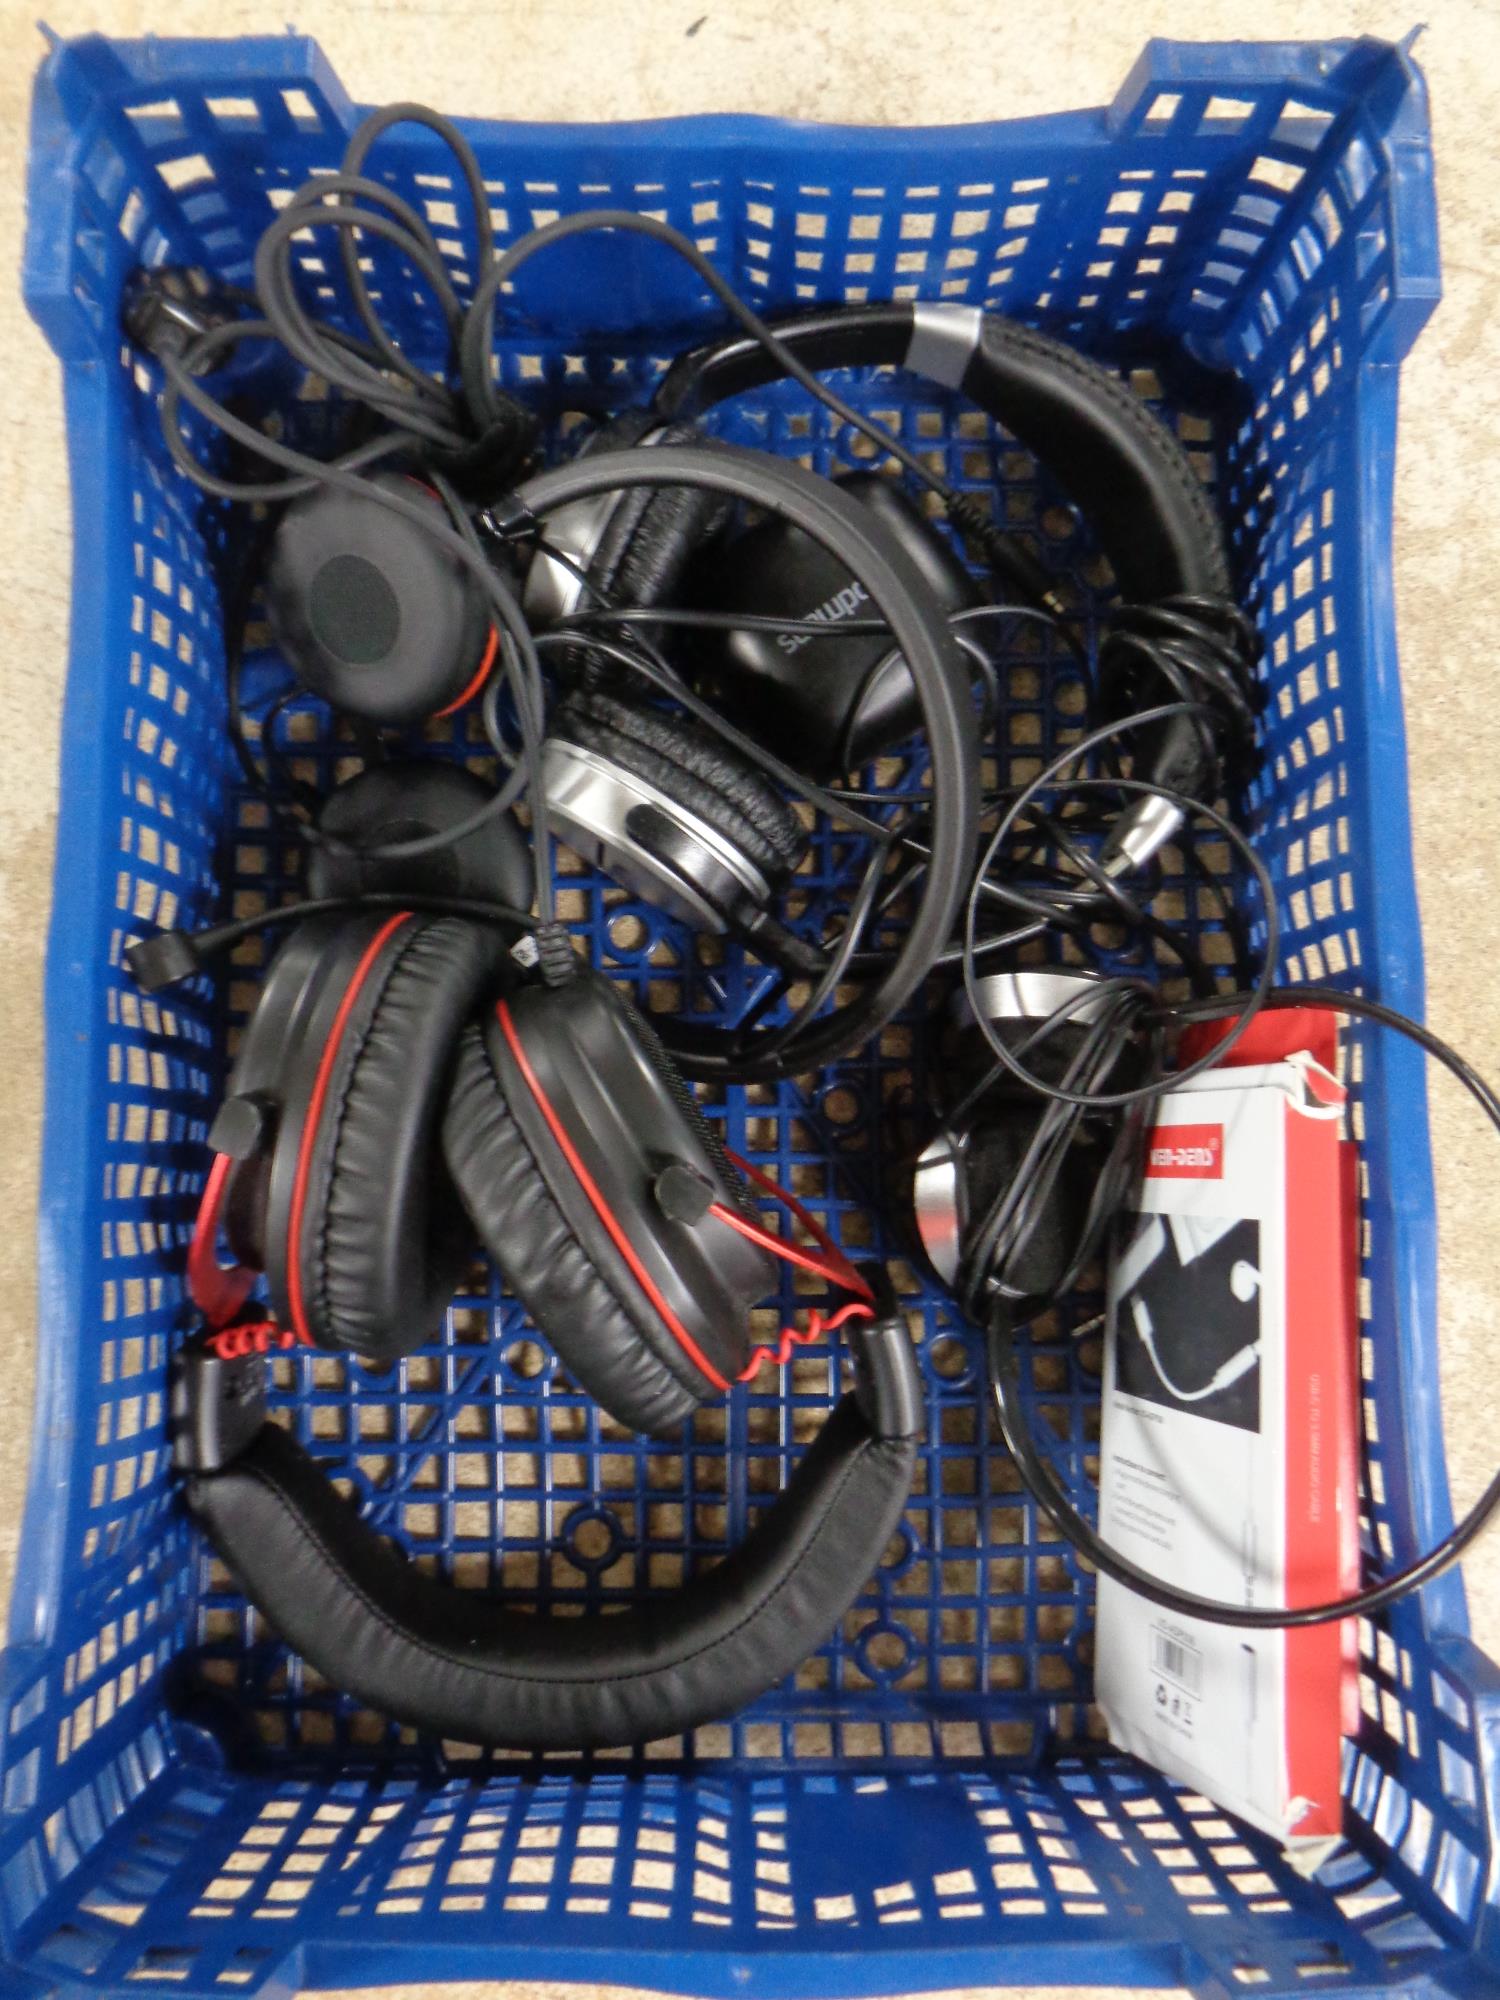 A basket containing headphones by Goodmans,